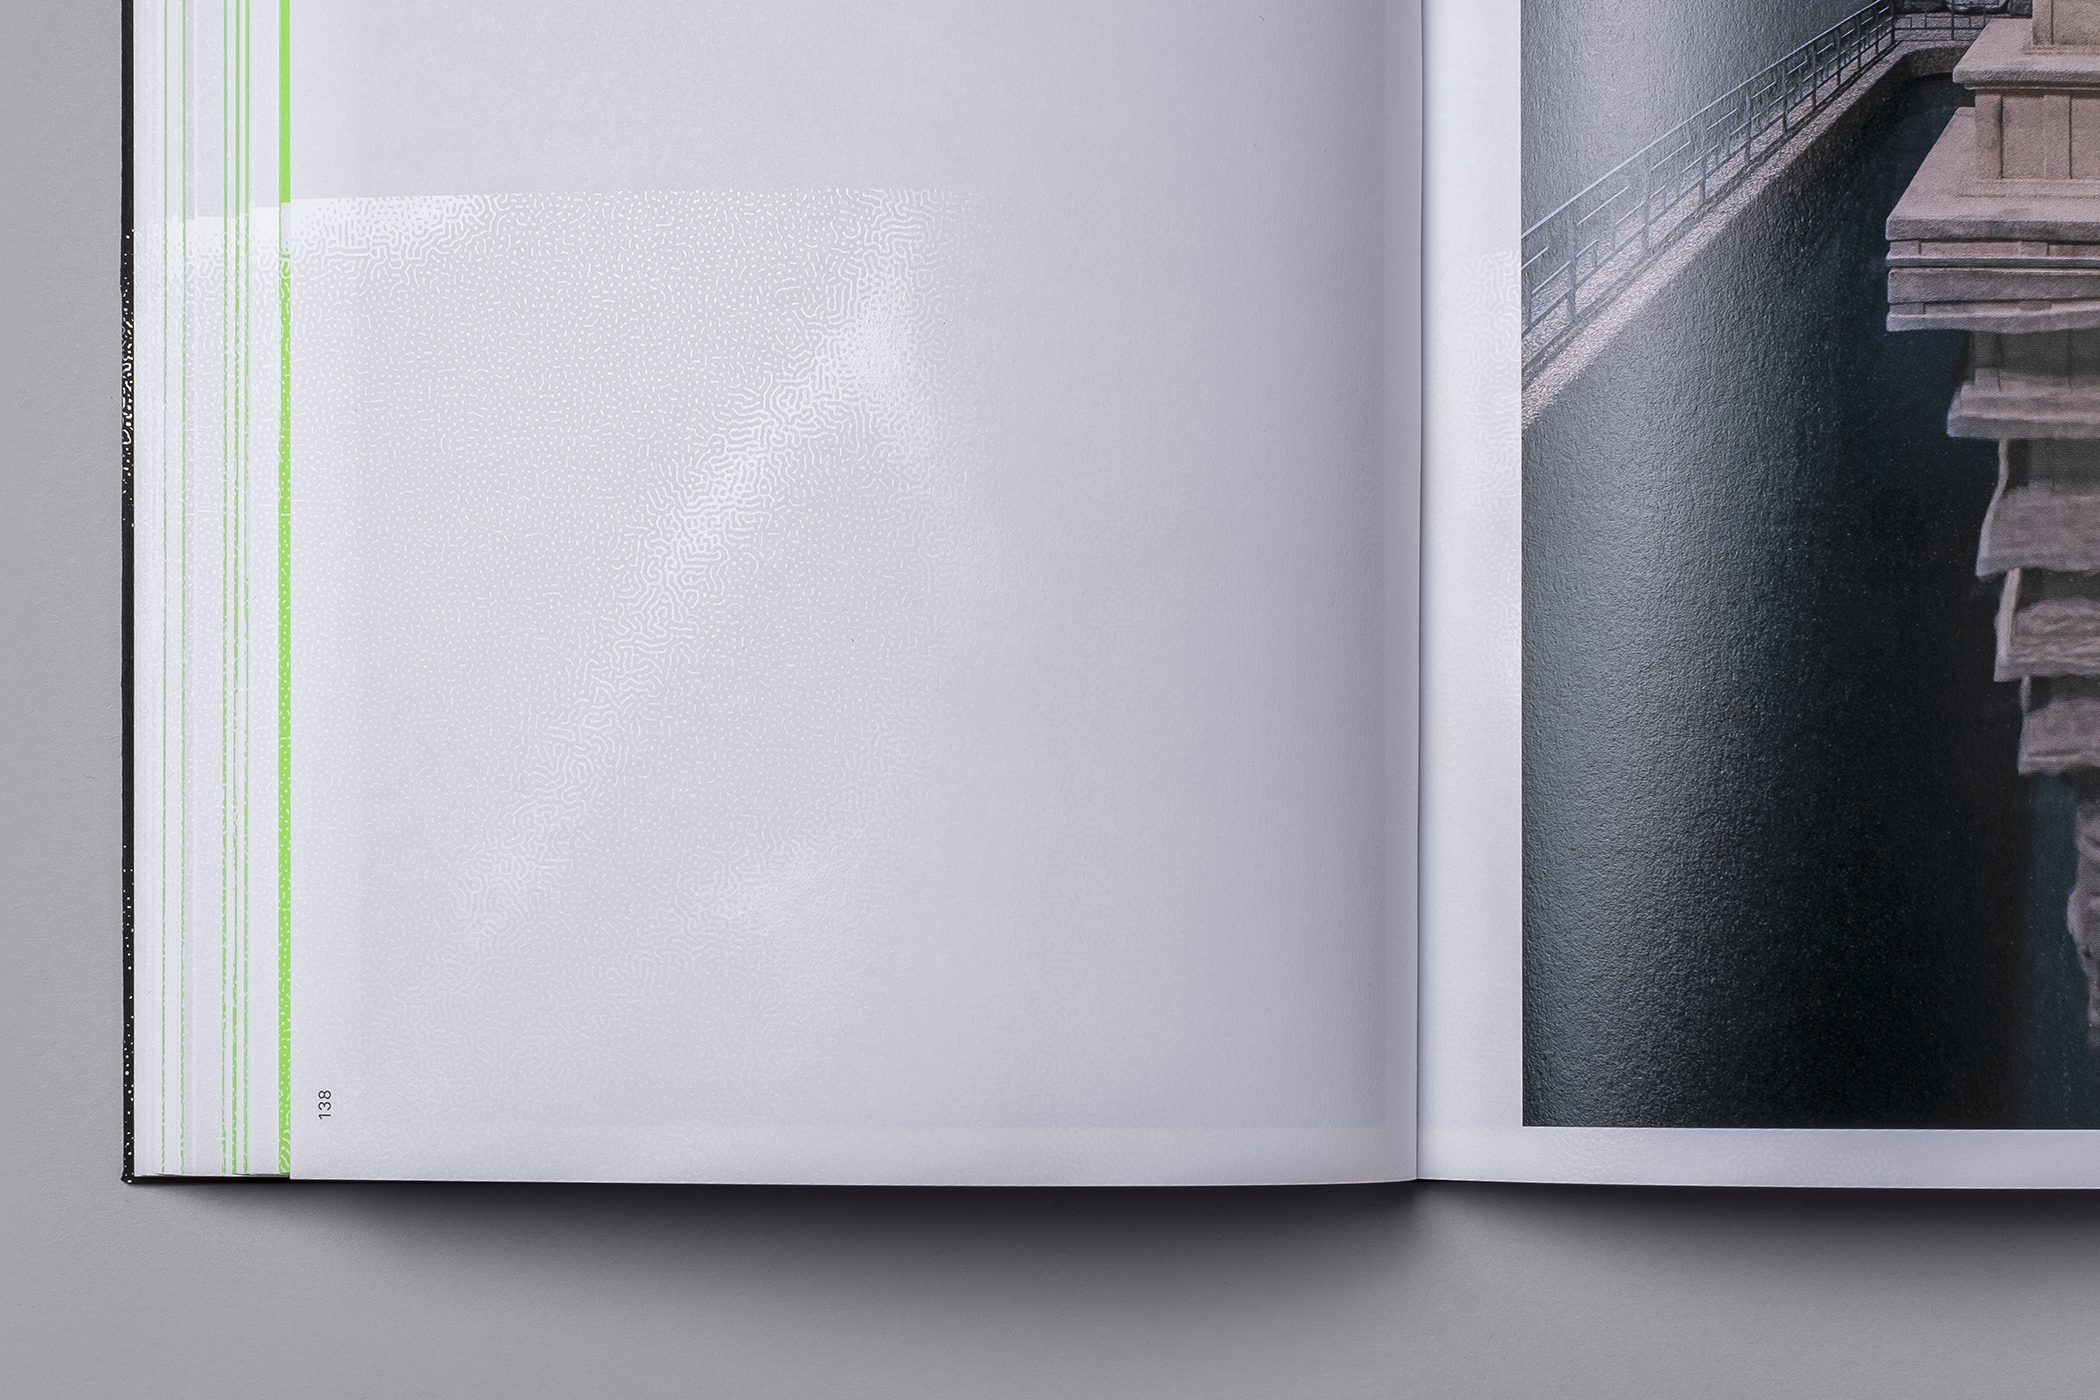 A look at the catalogue for the exhibition Leandro Erlich: Both Sides Now, designed by Studio fnt.